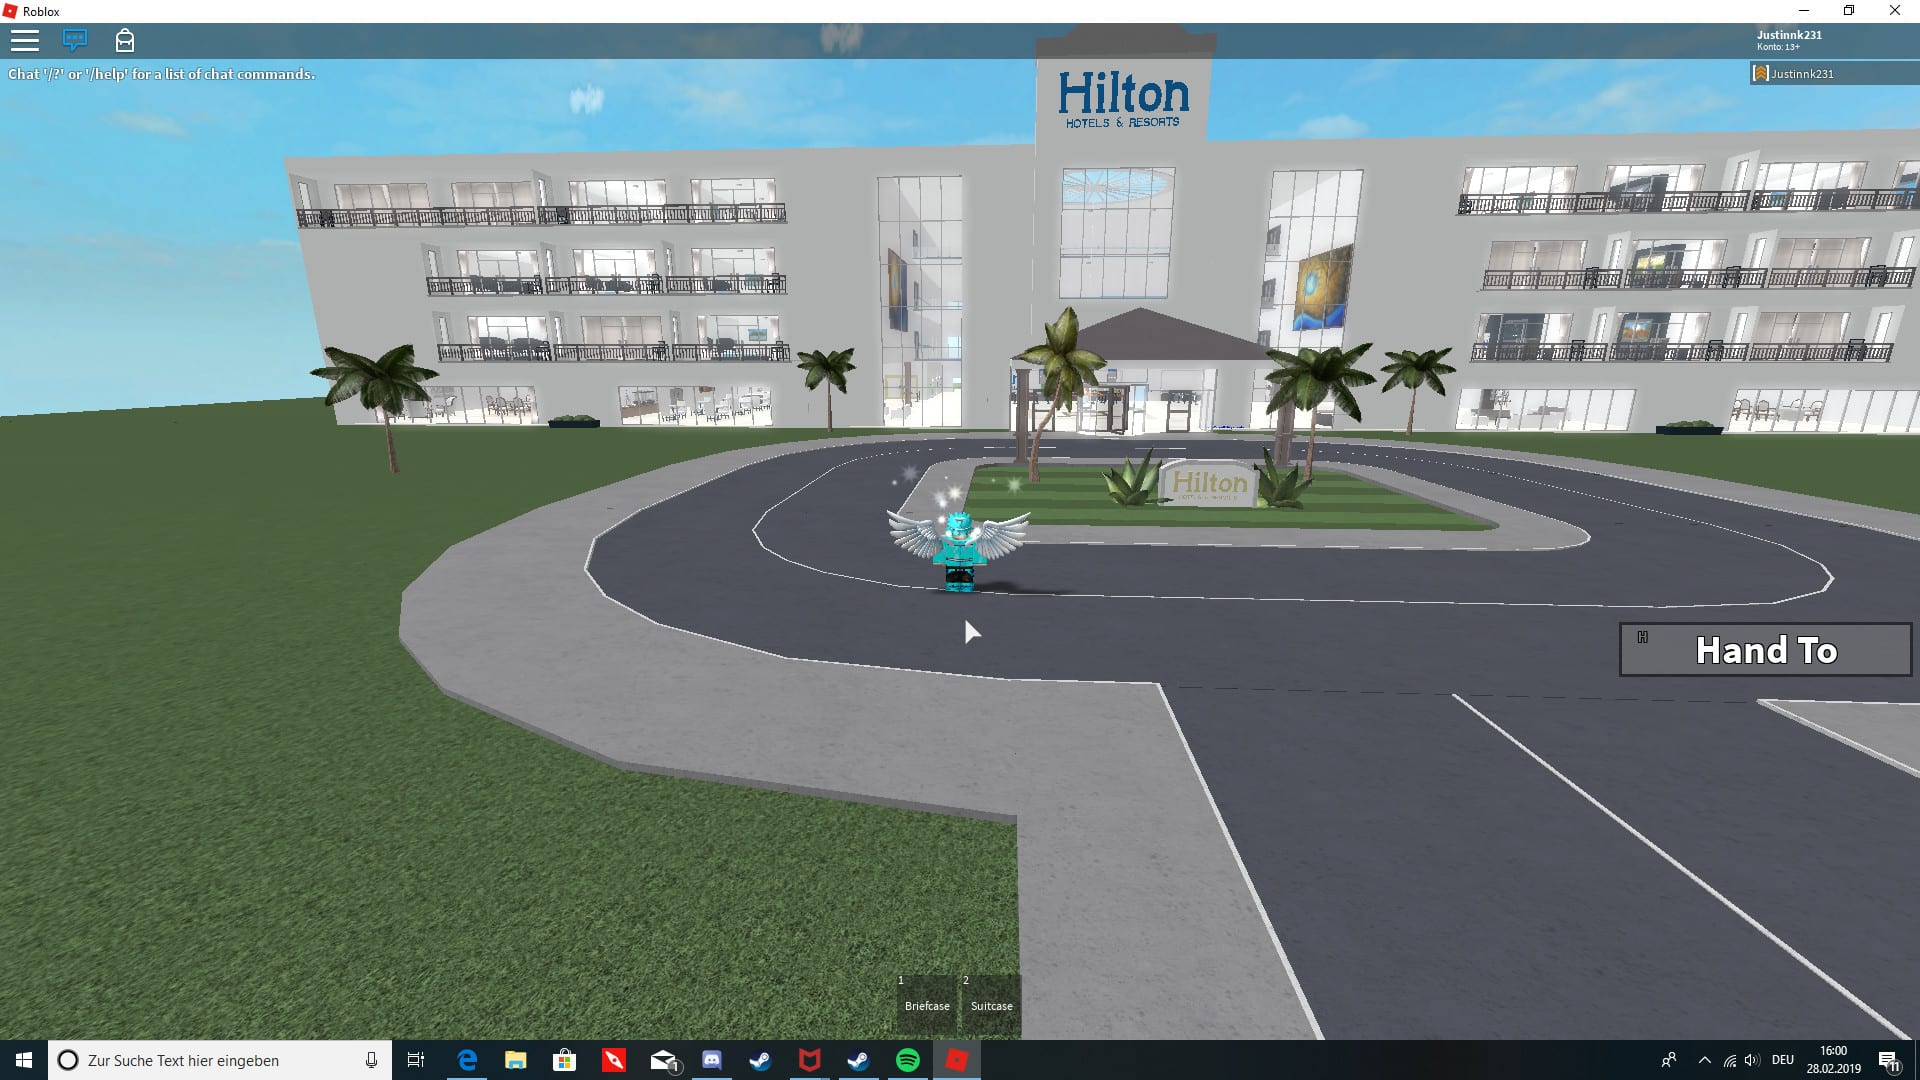 Give You A High Quality Game In Roblox By Jakekllr Fiverr - roblox howto get promoted in hilton hotels